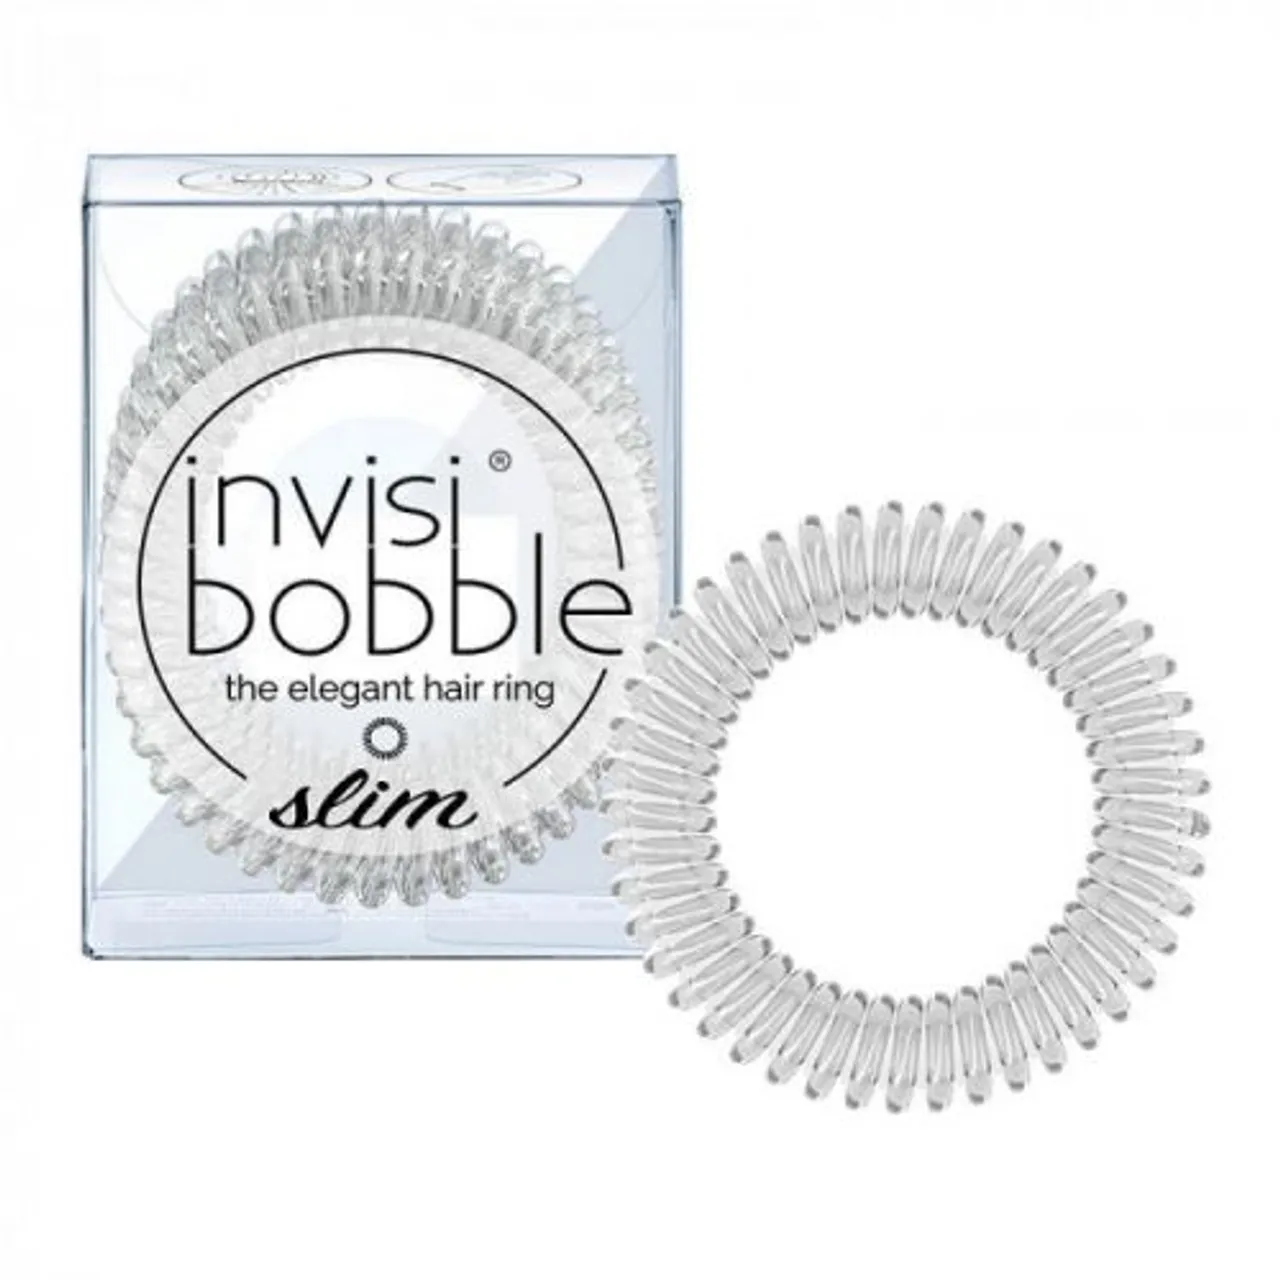 Invisibobble SLIM Crystal Clear